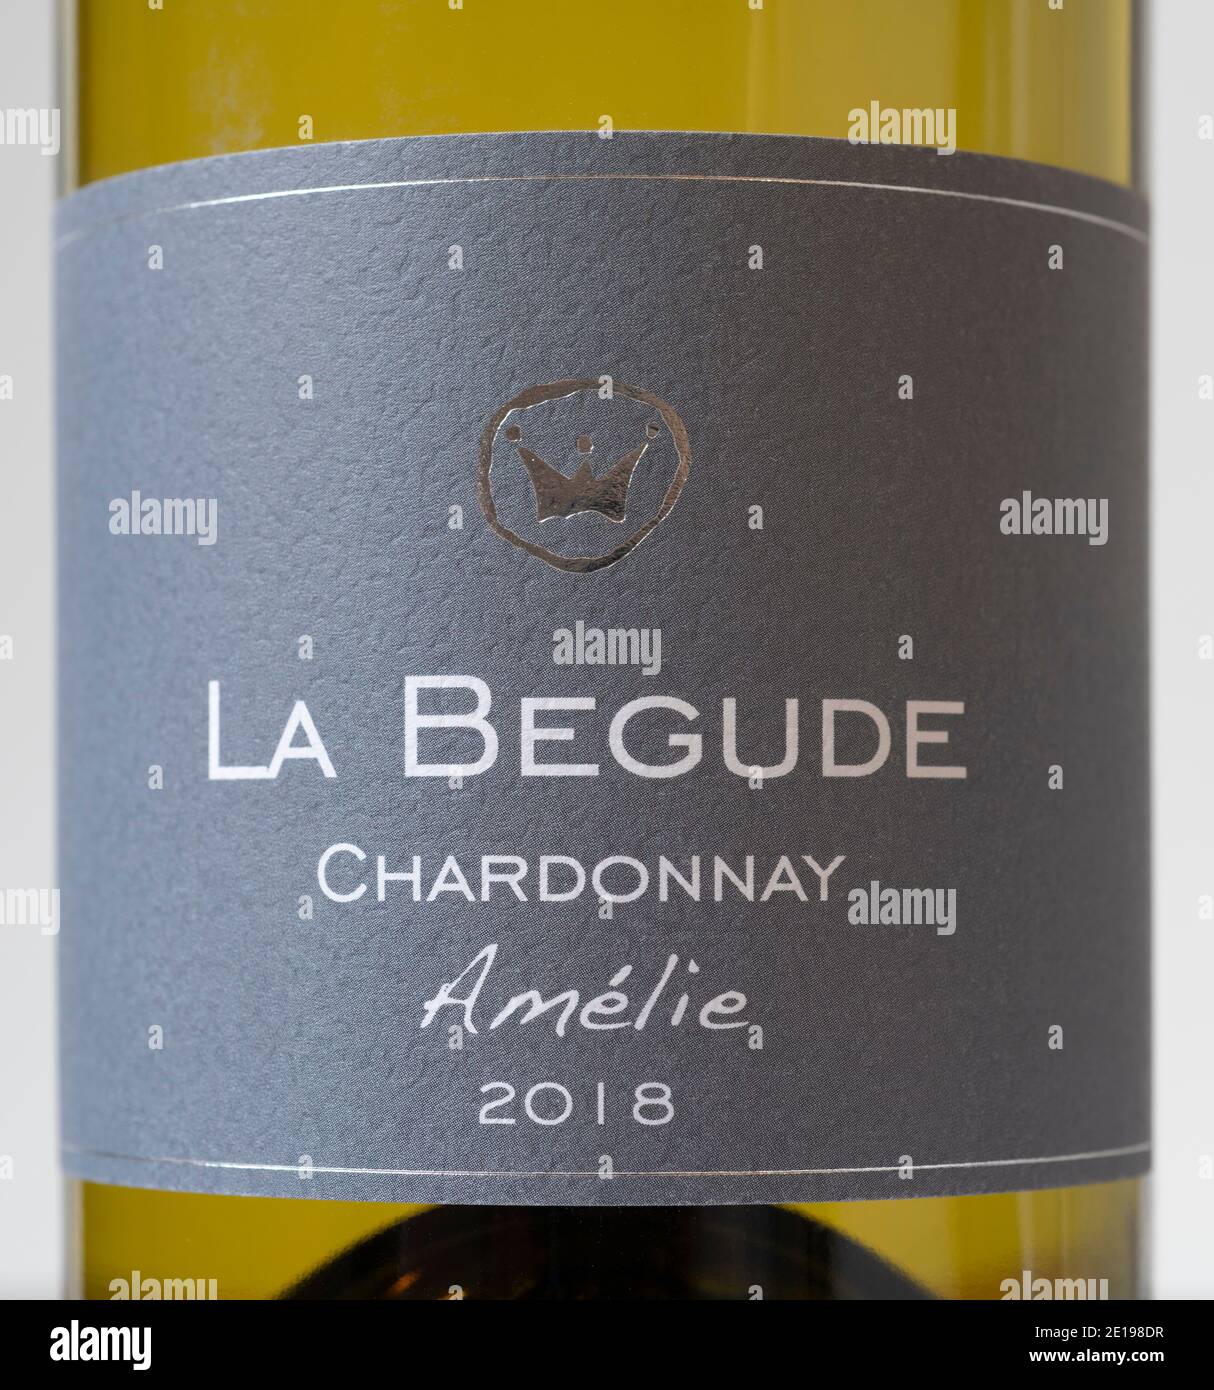 Domaine Begude Amelie Chardonnay French wine bottle label Stock Photo